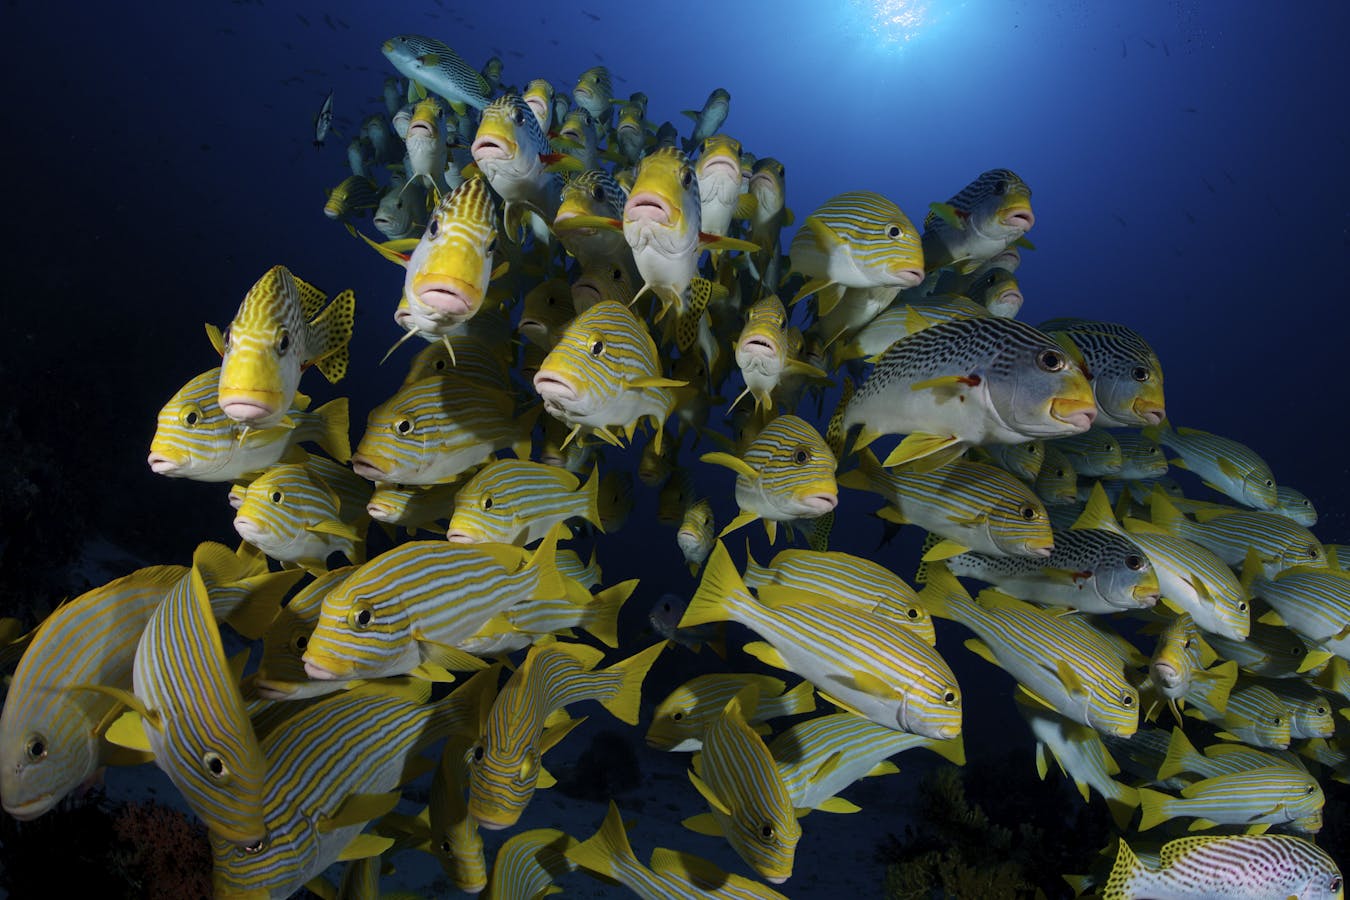 A school of diagonal banded and yellow ribbon sweetlips. Populations of commercially important fish species like these have been increasing in Bird's Head.